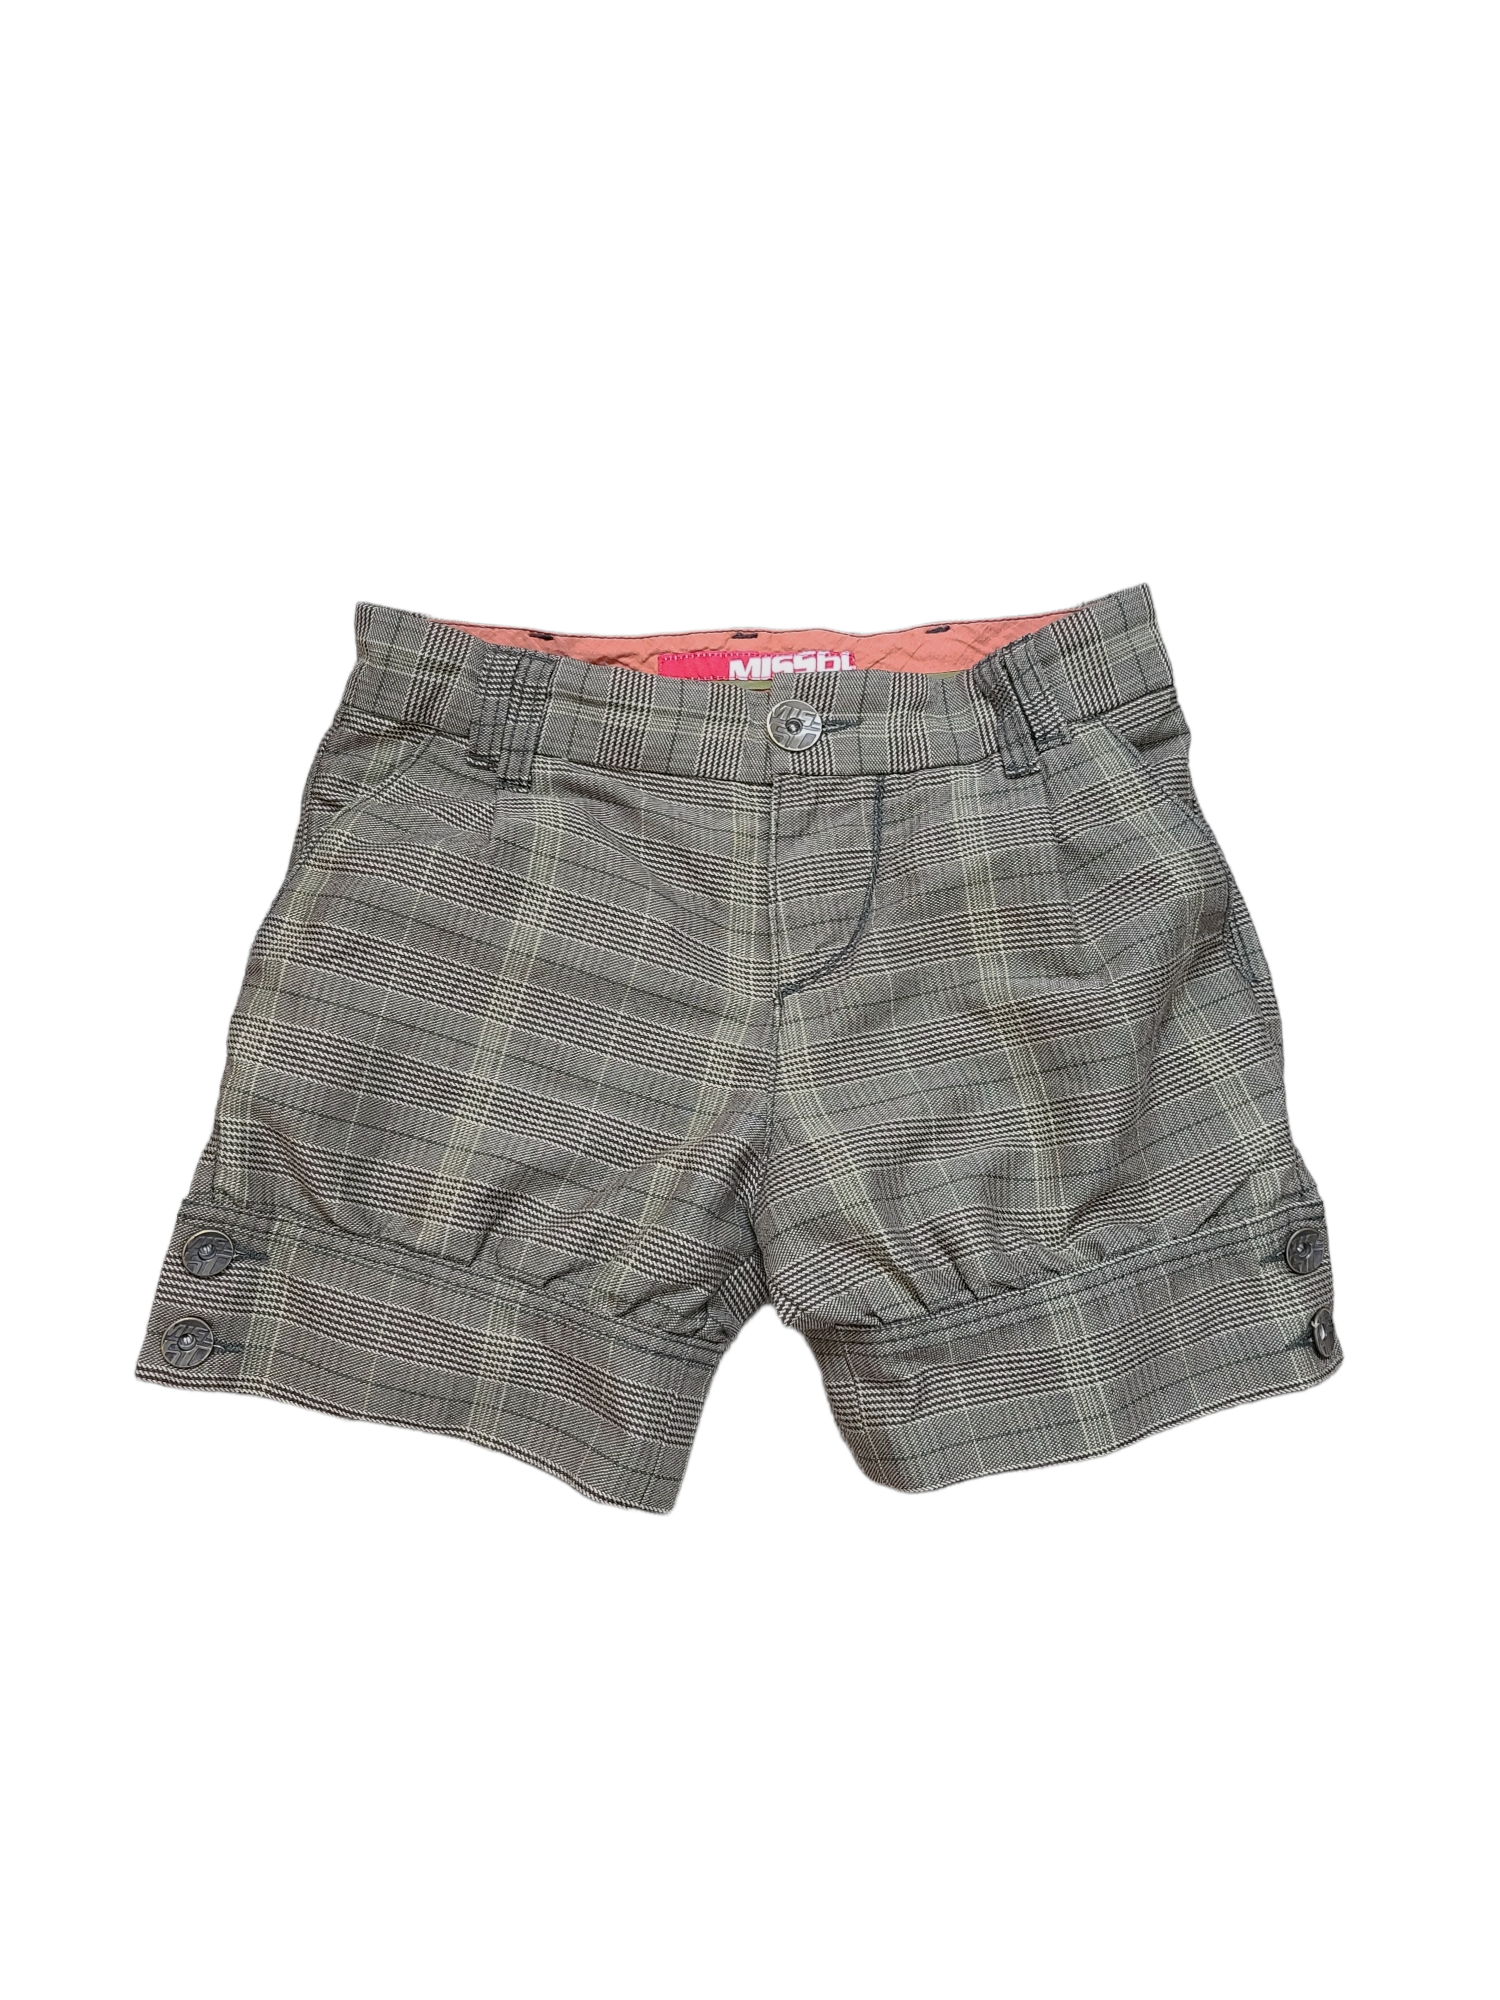 Plaid y2k Miss sixty short downtown bloomer